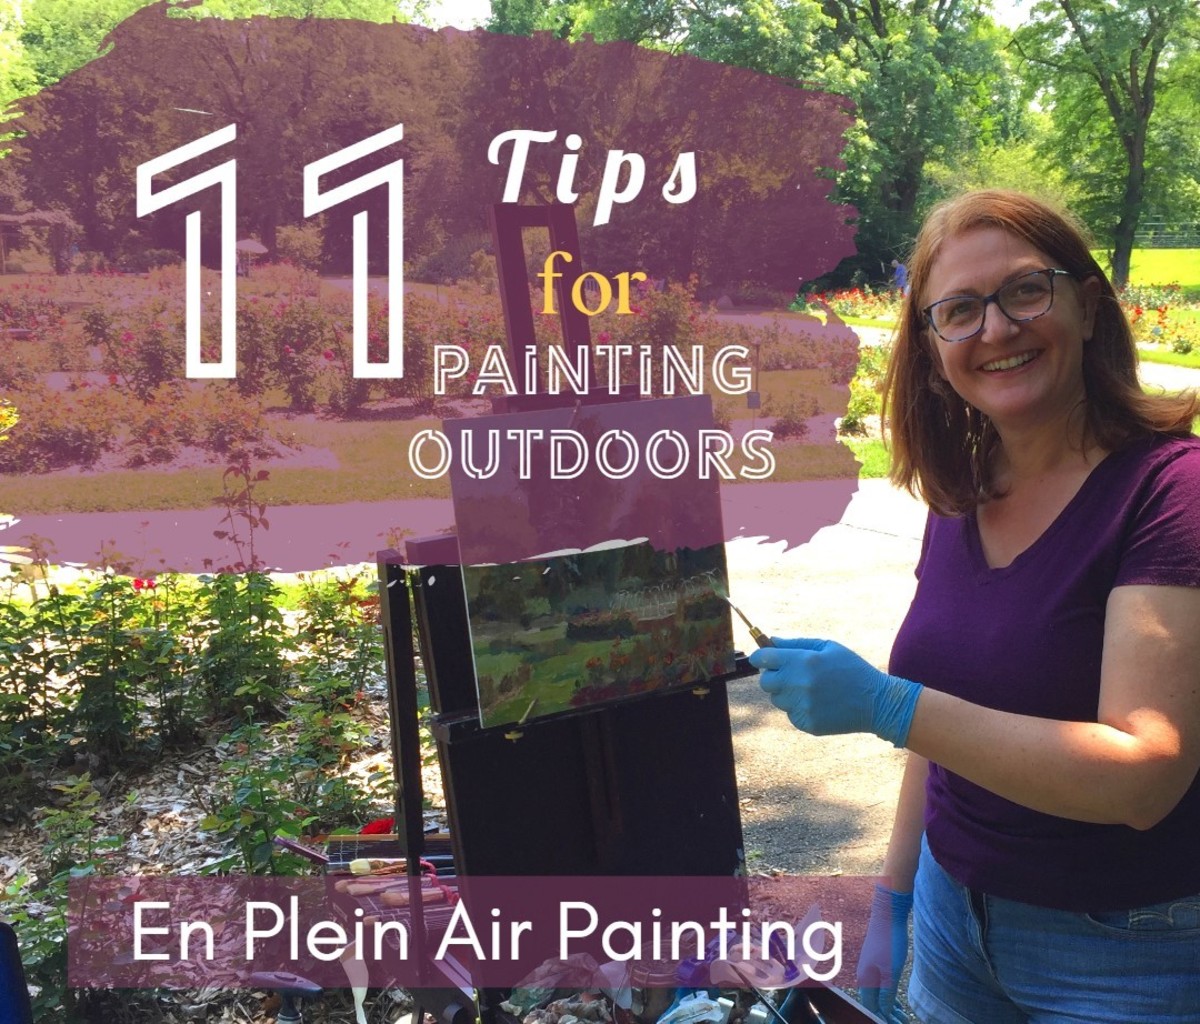 If you are used to studio painting, the first few paintings you do outdoors are going to be very challenging. These tips can help you make outdoors painting a little easier.